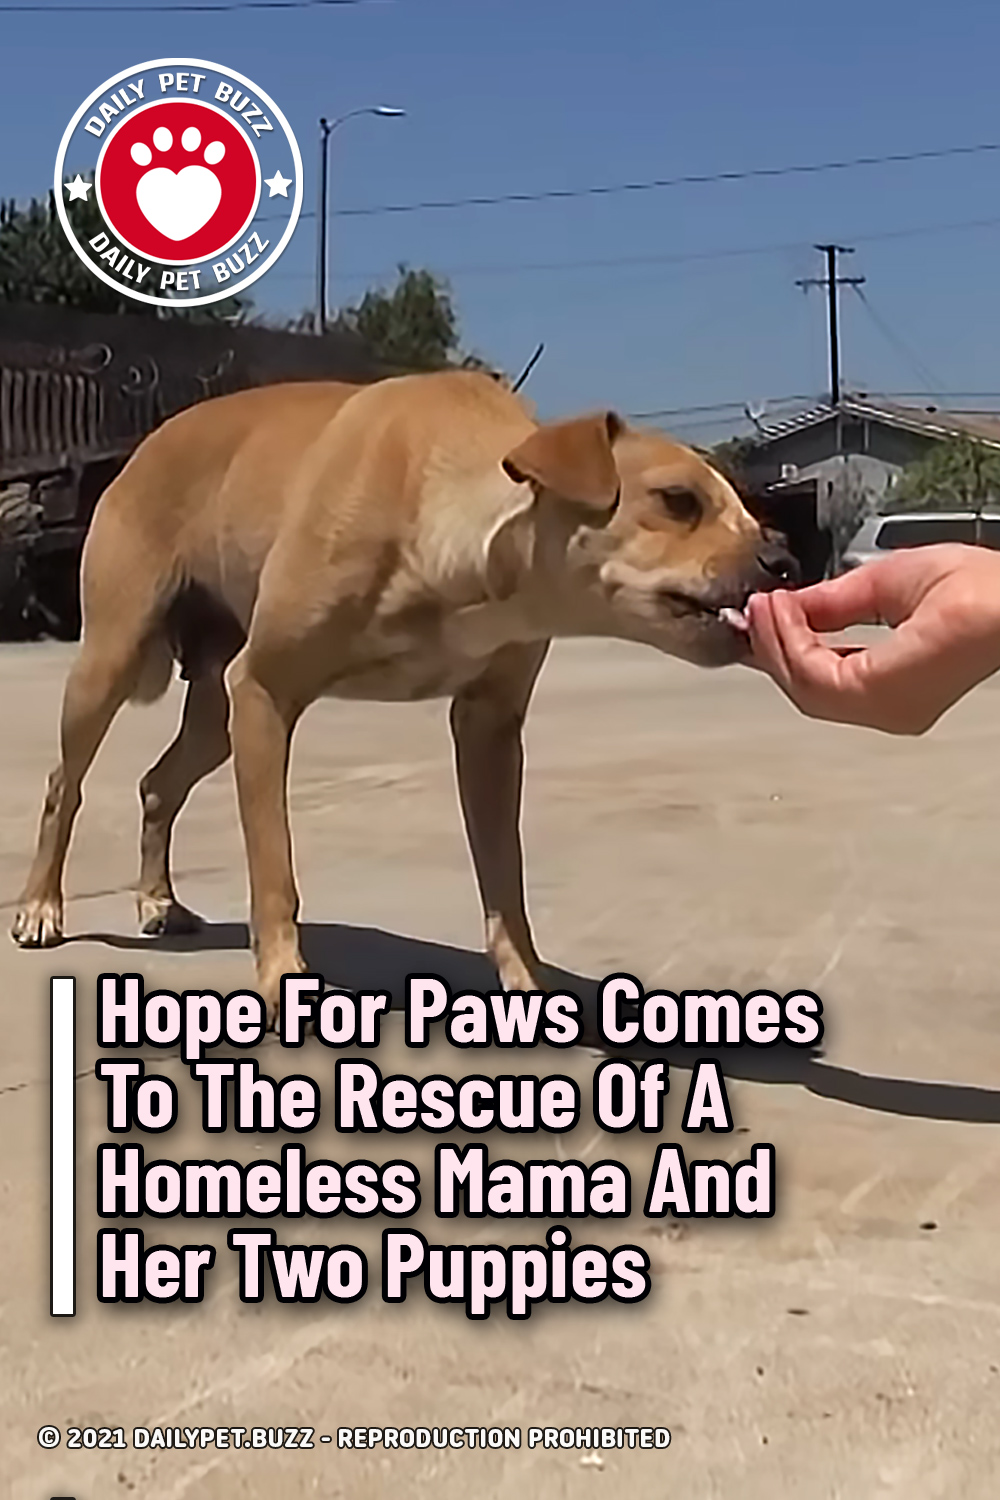 Hope For Paws Comes To The Rescue Of A Homeless Mama And Her Two Puppies